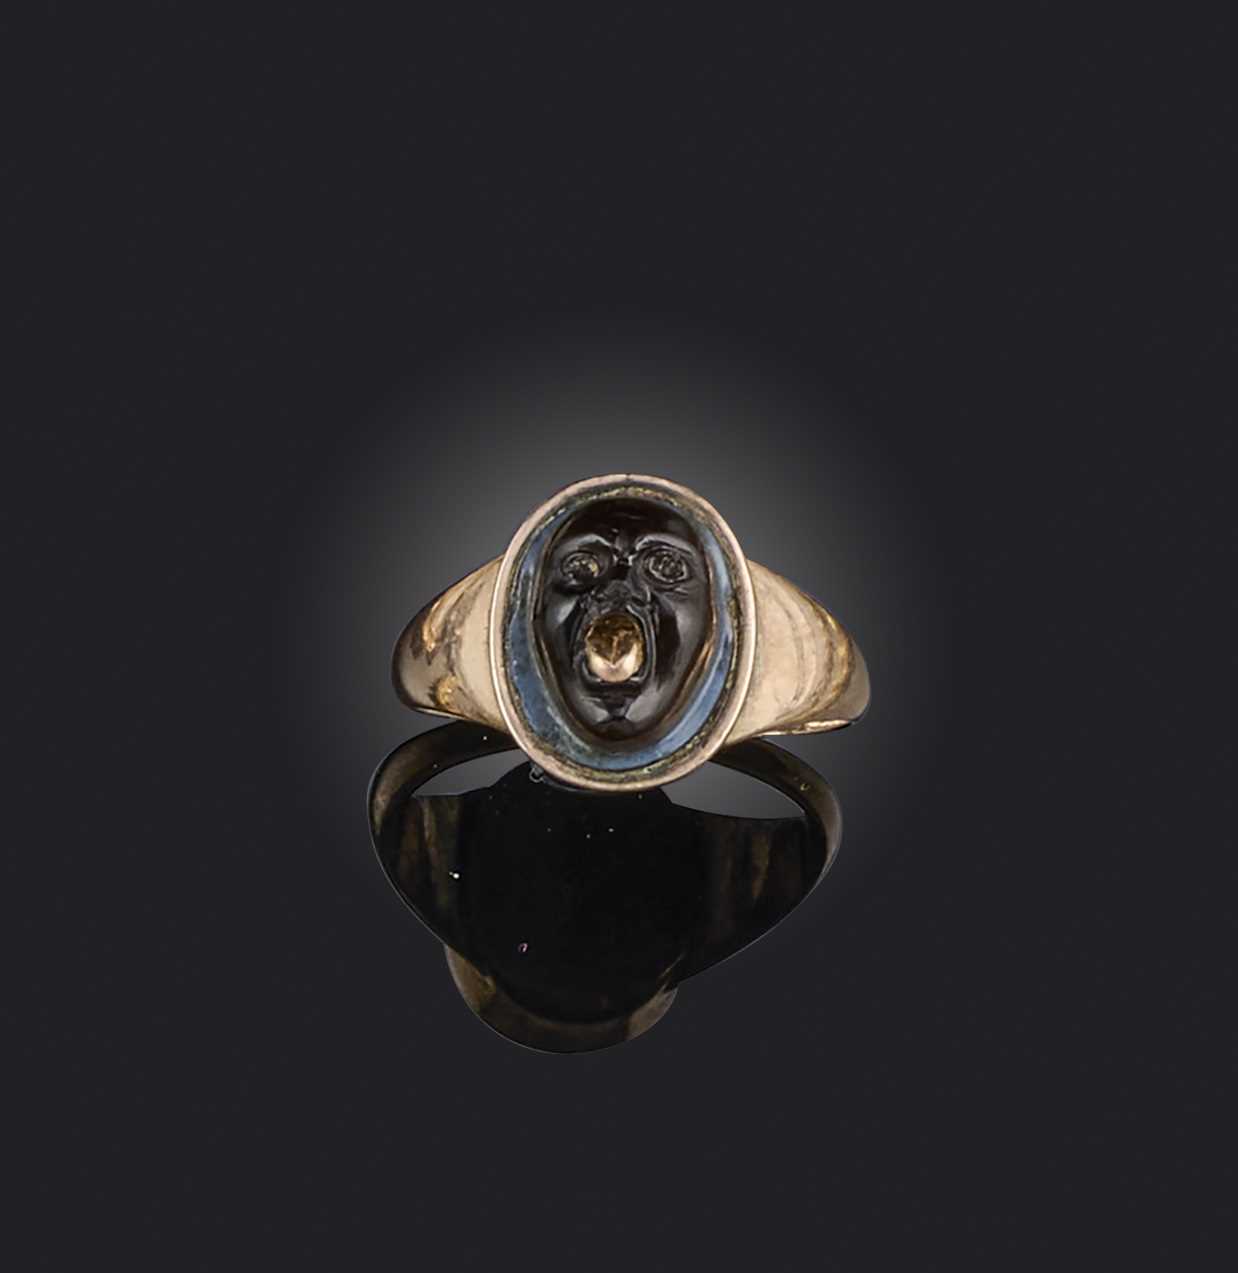 An early 19th century cameo ring, set with a banded agate cameo of a grotesque mask with a gold